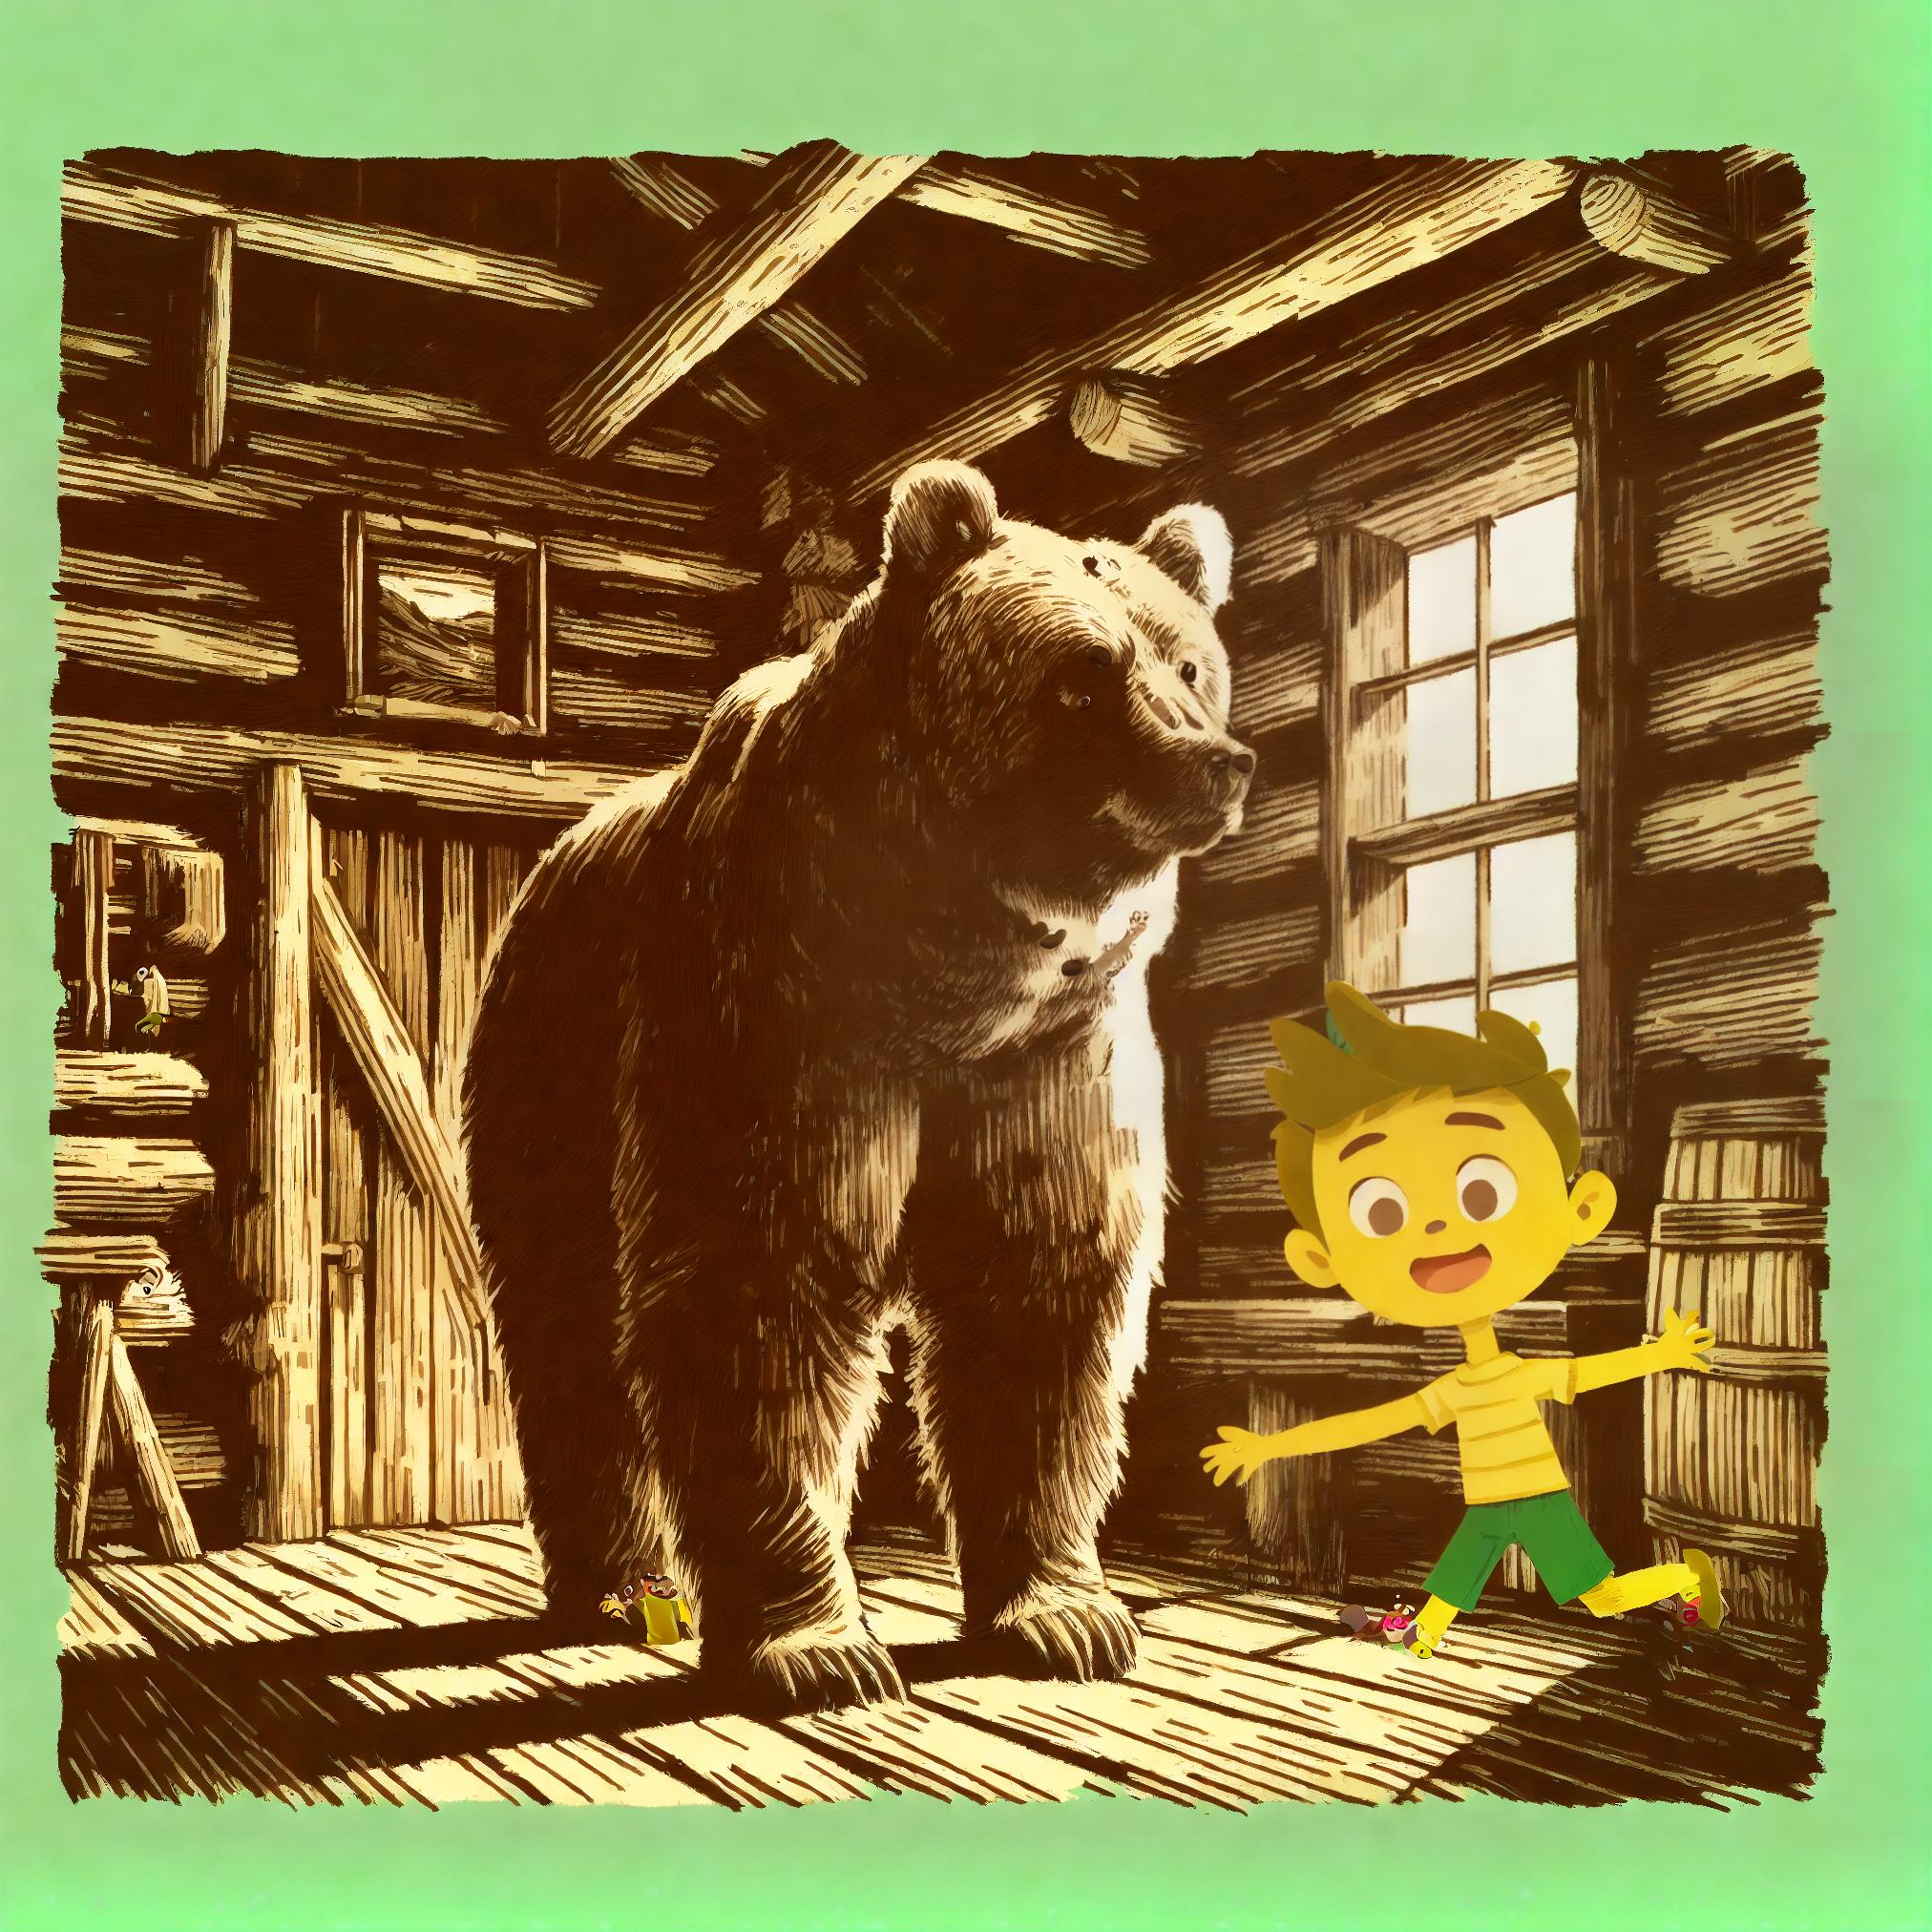  a boy with yellow hat and brown shirt and green pants, a bear standing, in the cabin